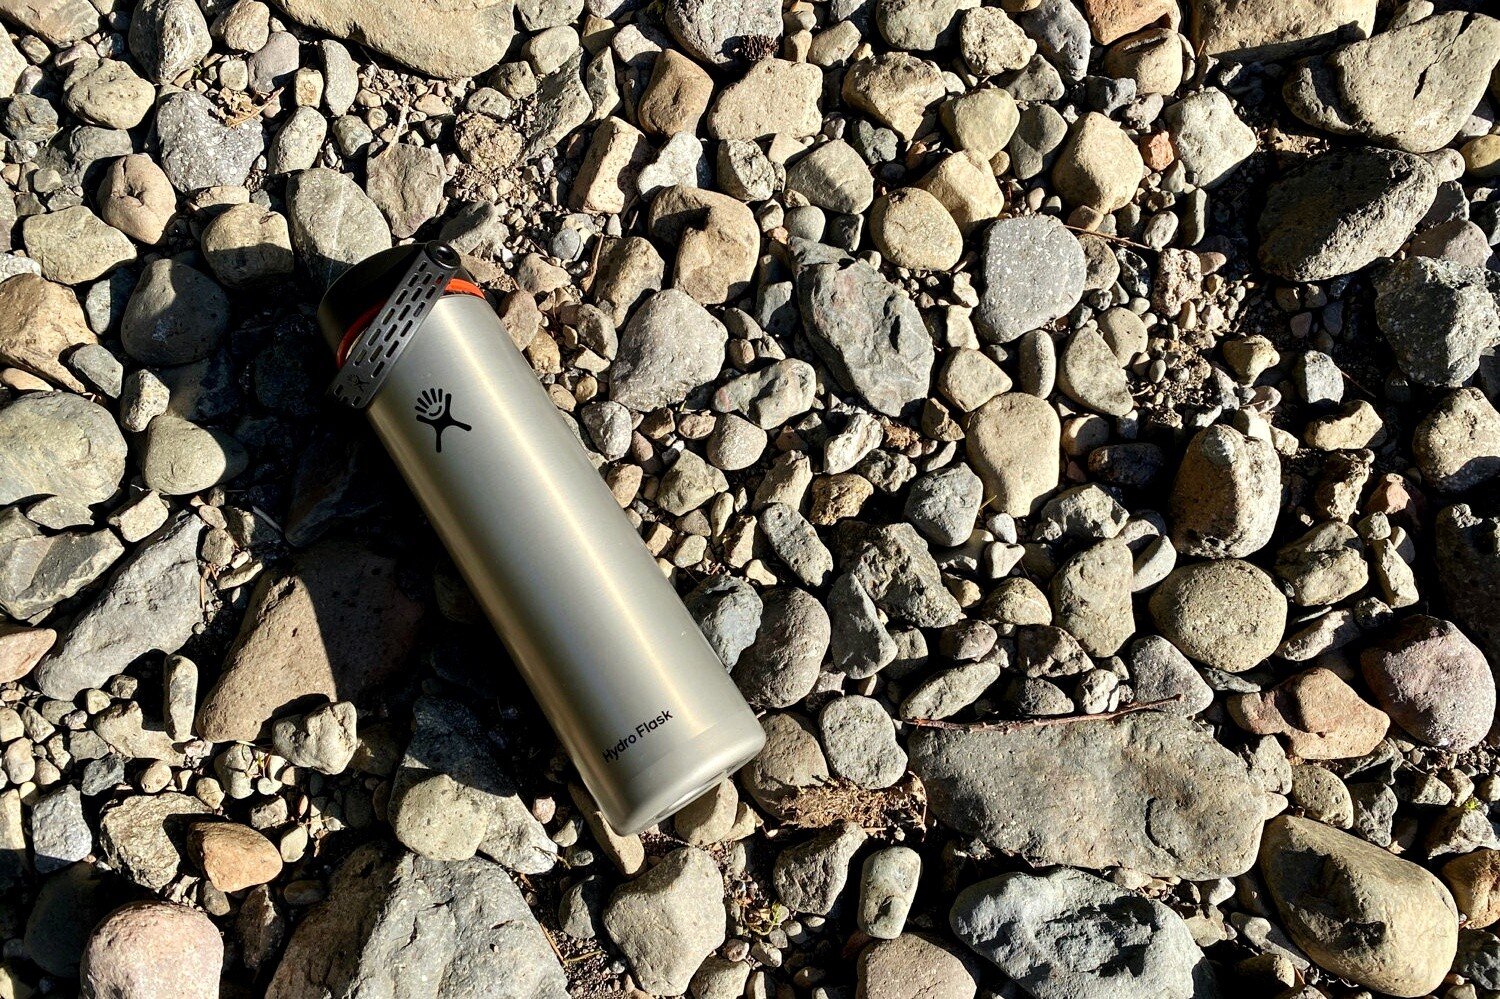 https://www.cleverhiker.com/wp-content/uploads/2020/05/Hiking-with-the-Hydro-Flask-Lightweight-Trail-Series-Wide-Mouth-Vacuum-Insulated-Water-Bottles.jpeg